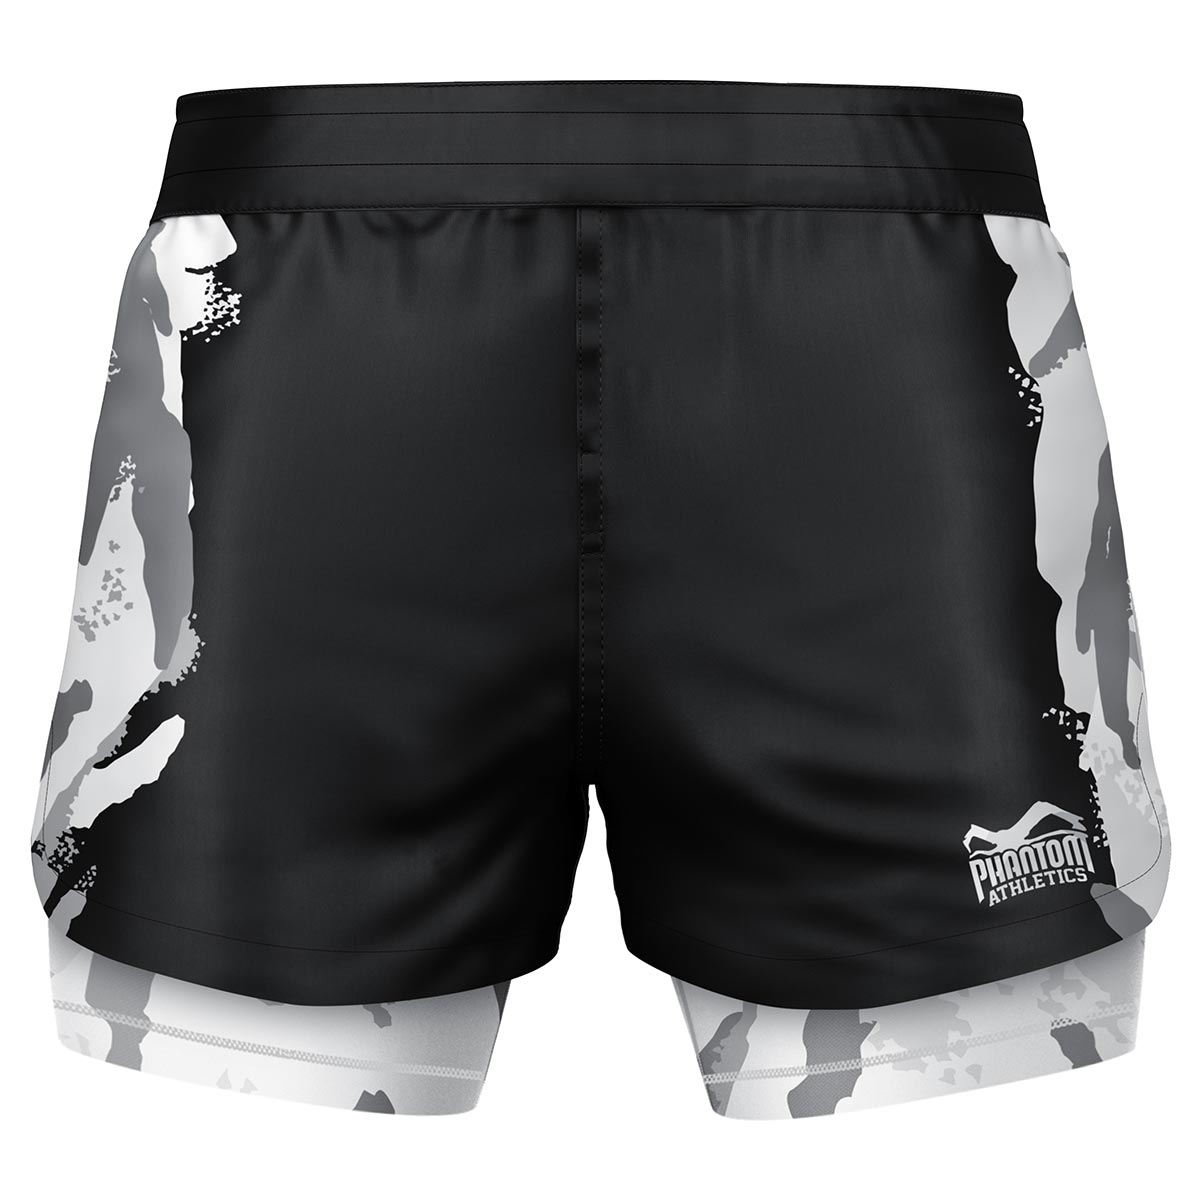 Phantom Fightshorts Fusion 2in1. Ultimate shorts for your martial arts with integrated compression shorts. Ideal for MMA, BJJ, wrestling, grappling or Muay Thai. In black with camo design.